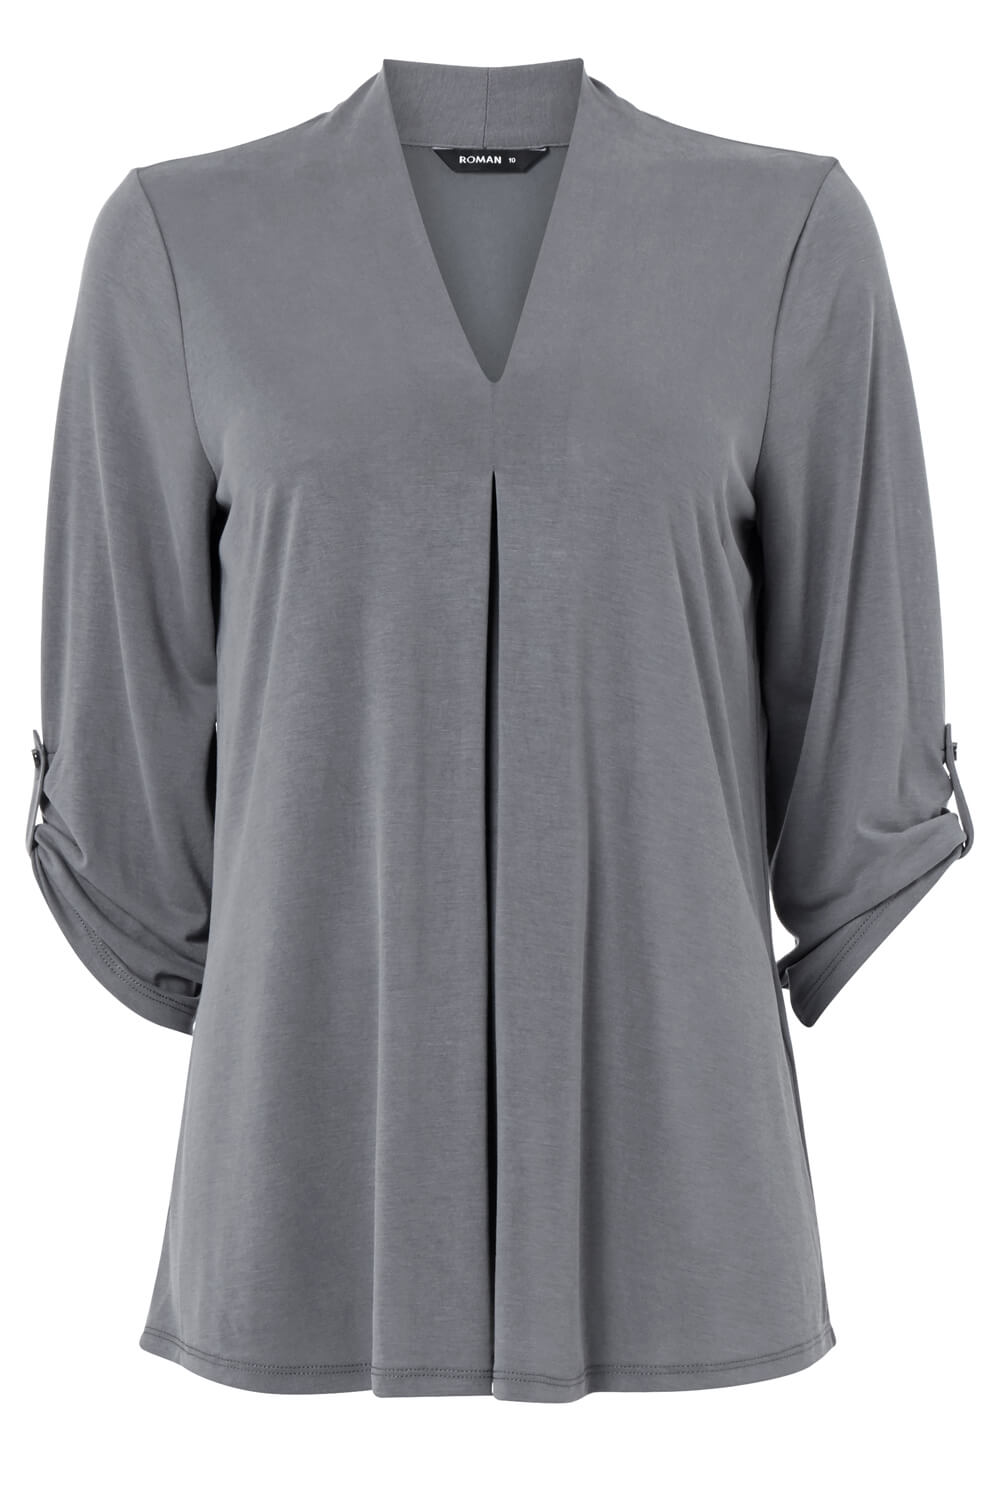 Grey Pleat Front 3/4 Sleeve Top, Image 5 of 5